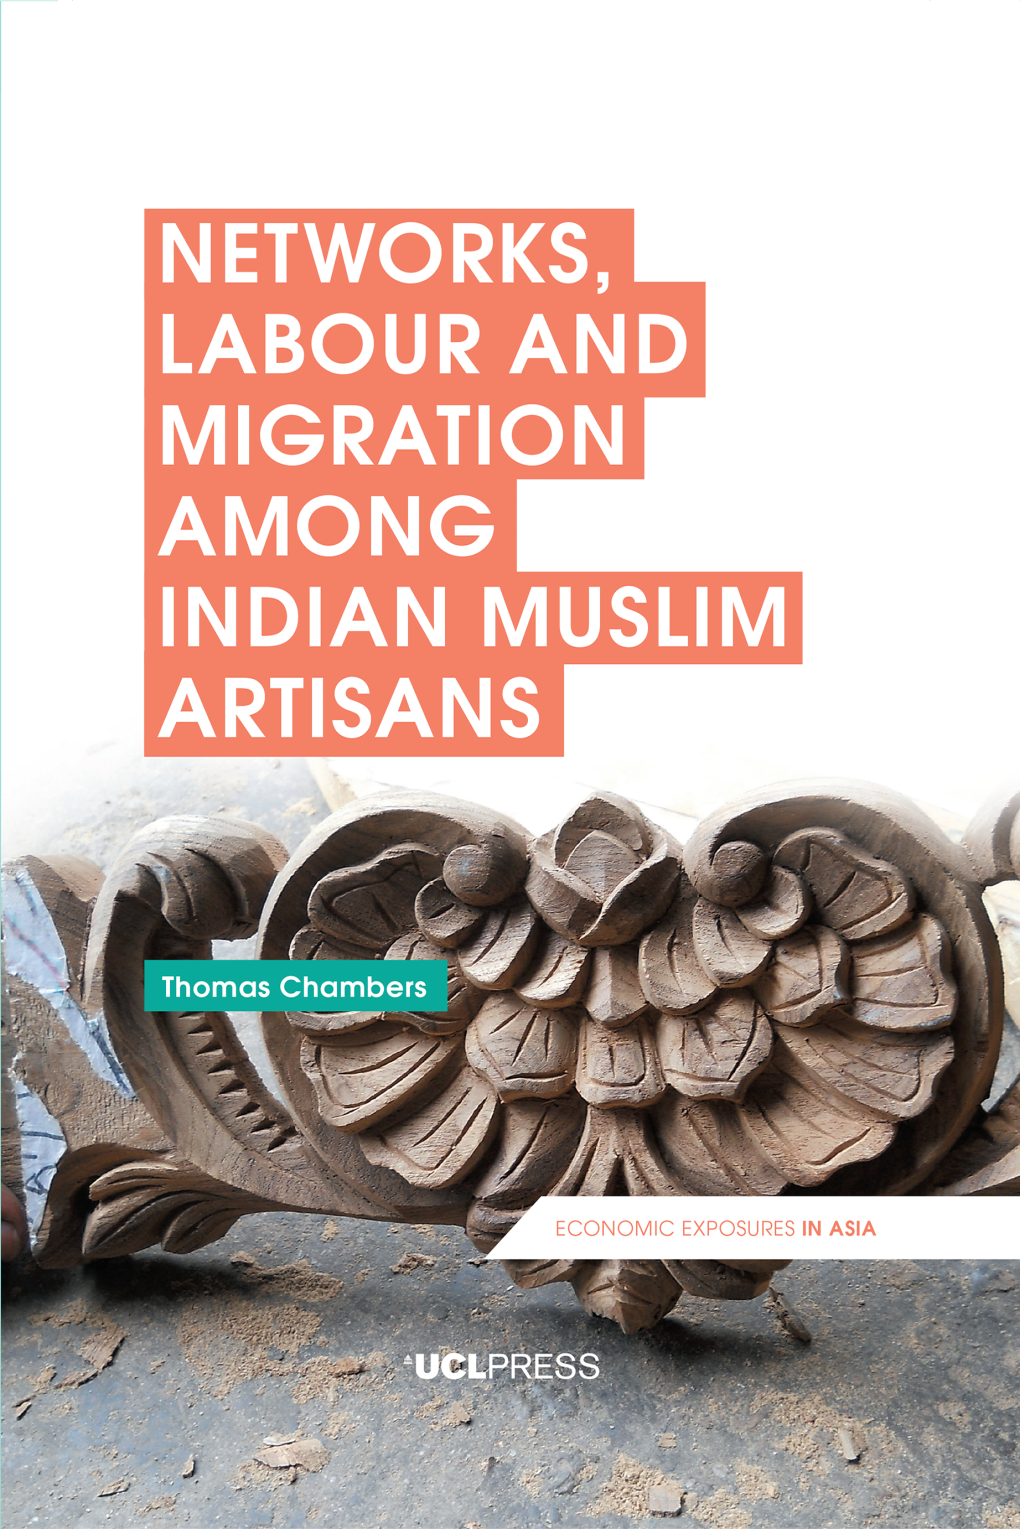 Networks, Labour and Migration Among Indian Muslim Artisans ECONOMIC EXPOSURES in ASIA